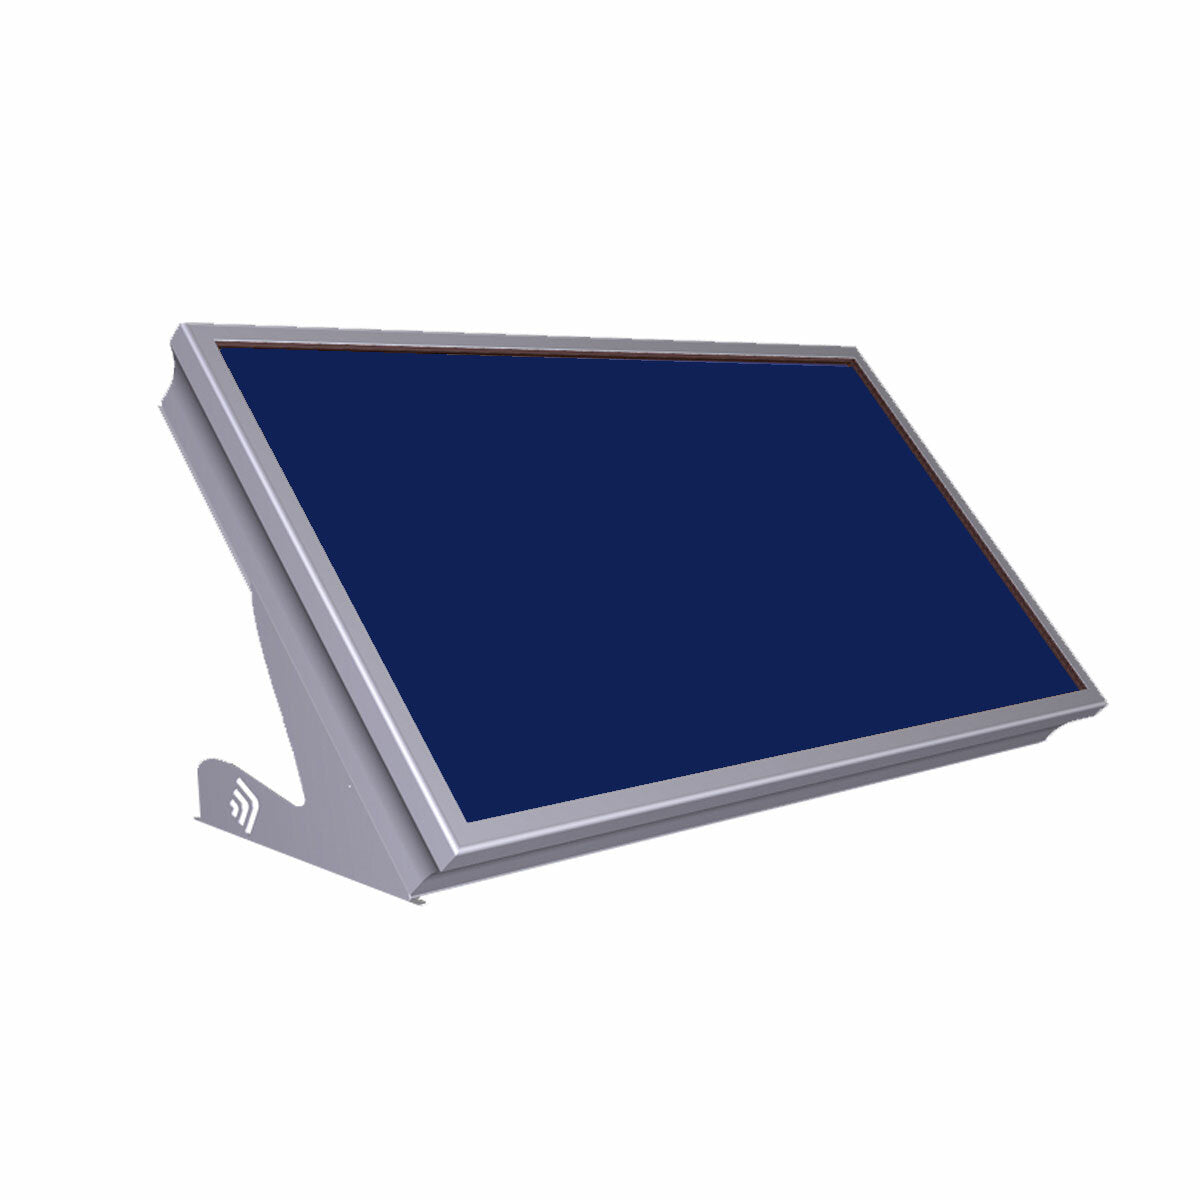 Cordivari Stratos DR 260 natural circulation solar panel for flat and pitched roof 245 liters